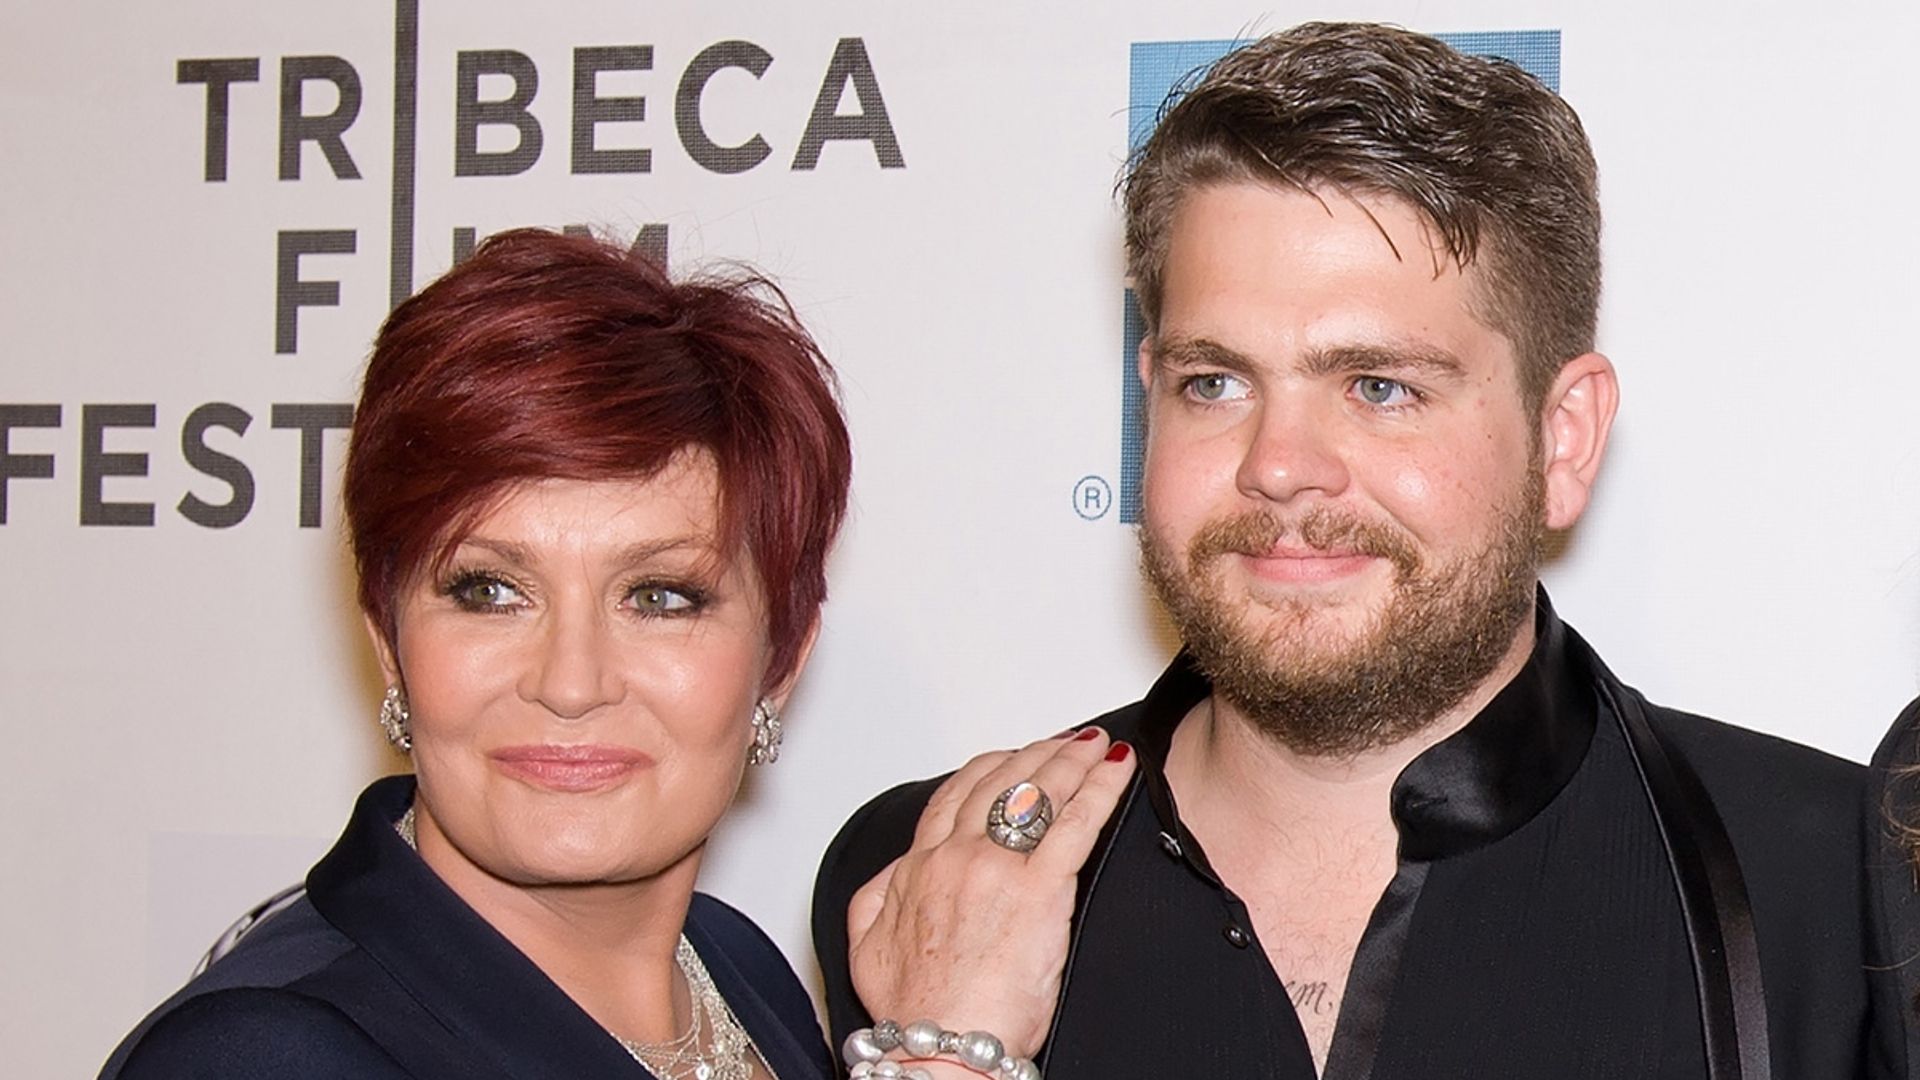 Sharon Osbourne shares rare photo of son Jack - and he looks totally unrecognisable!